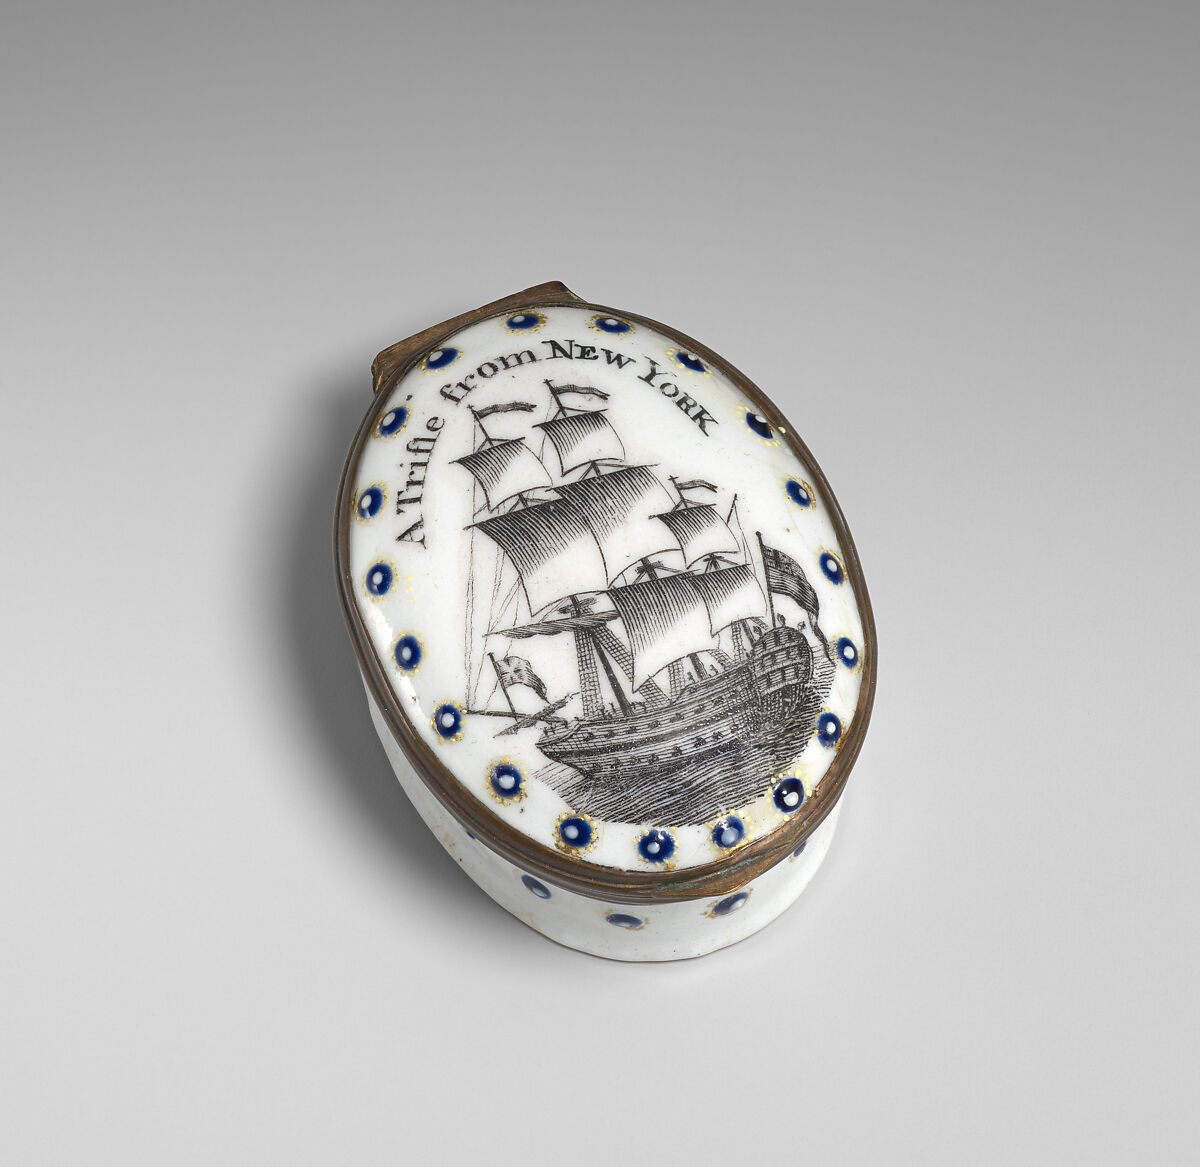 Enamel Patch Box "A Trifle from New York", Enamel on copper, British, made for the American market  